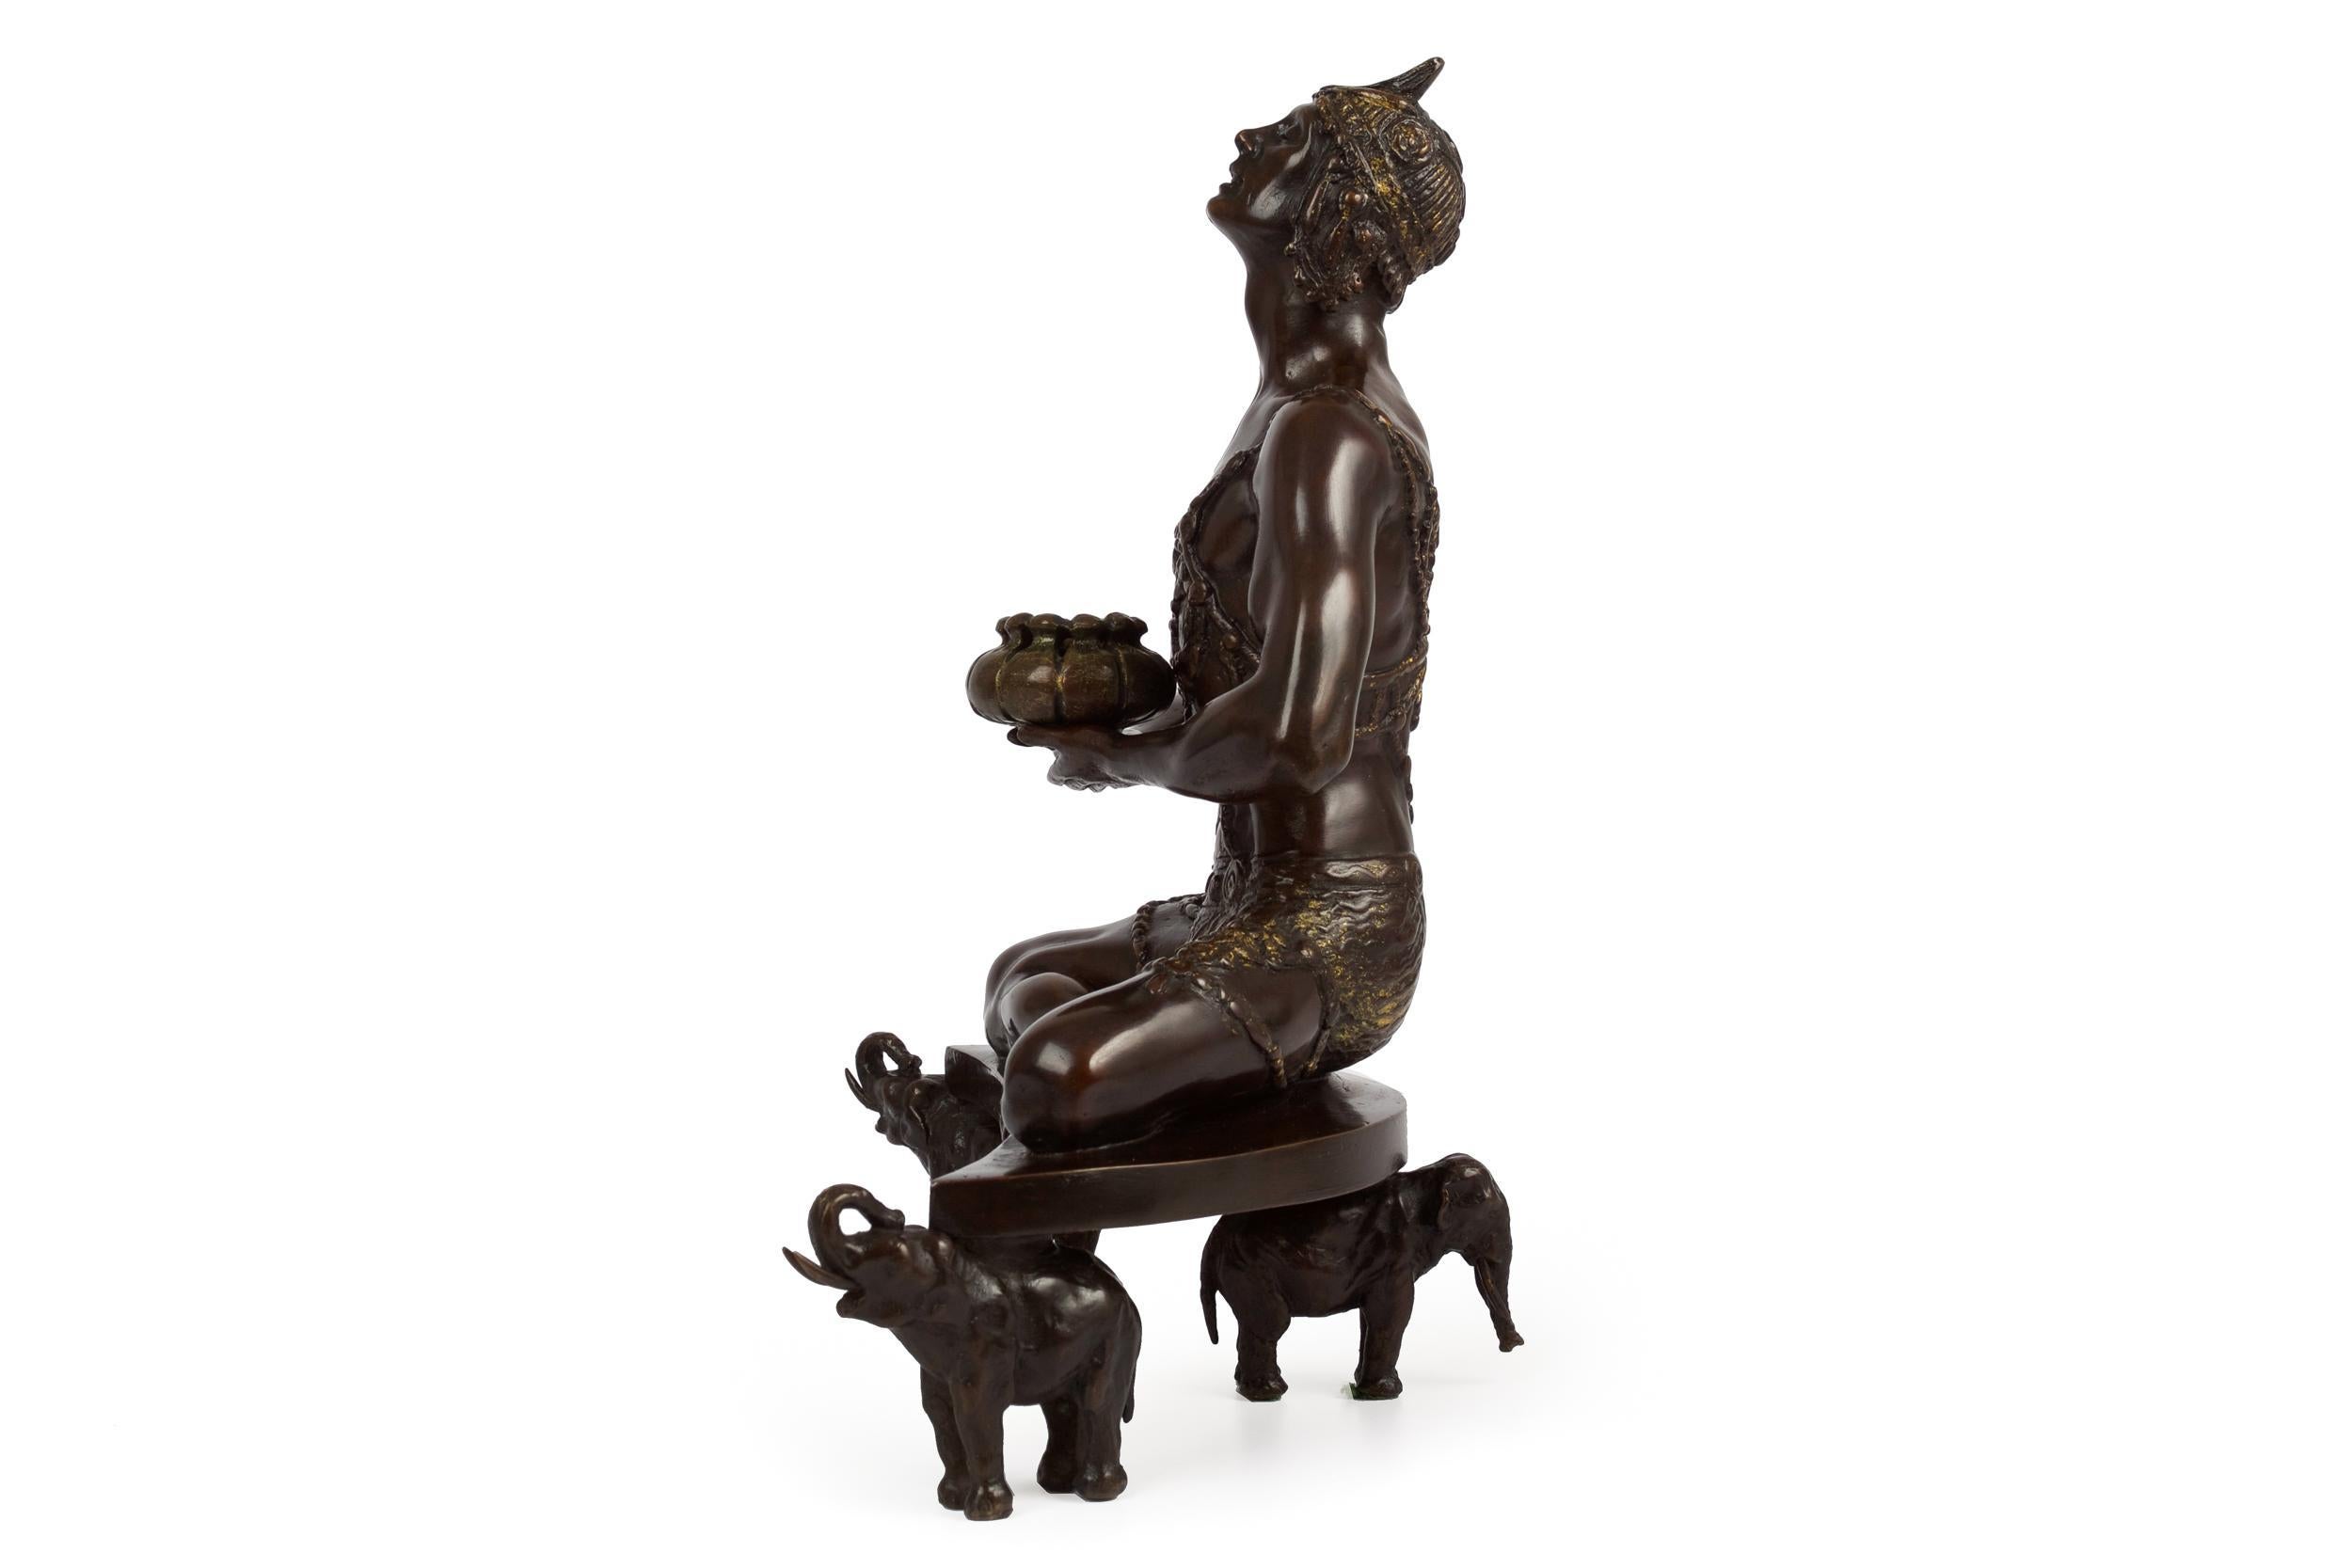 Completed in 1920, Malvina Hoffman's Hindu Incense Burner was modeled by dancer Serge Oukrainsky. He was one of the dancers in the troupe of Anna Pavlova, a renowned dancer that Hoffman met in 1914 while studying ballerina and dance in depth. It